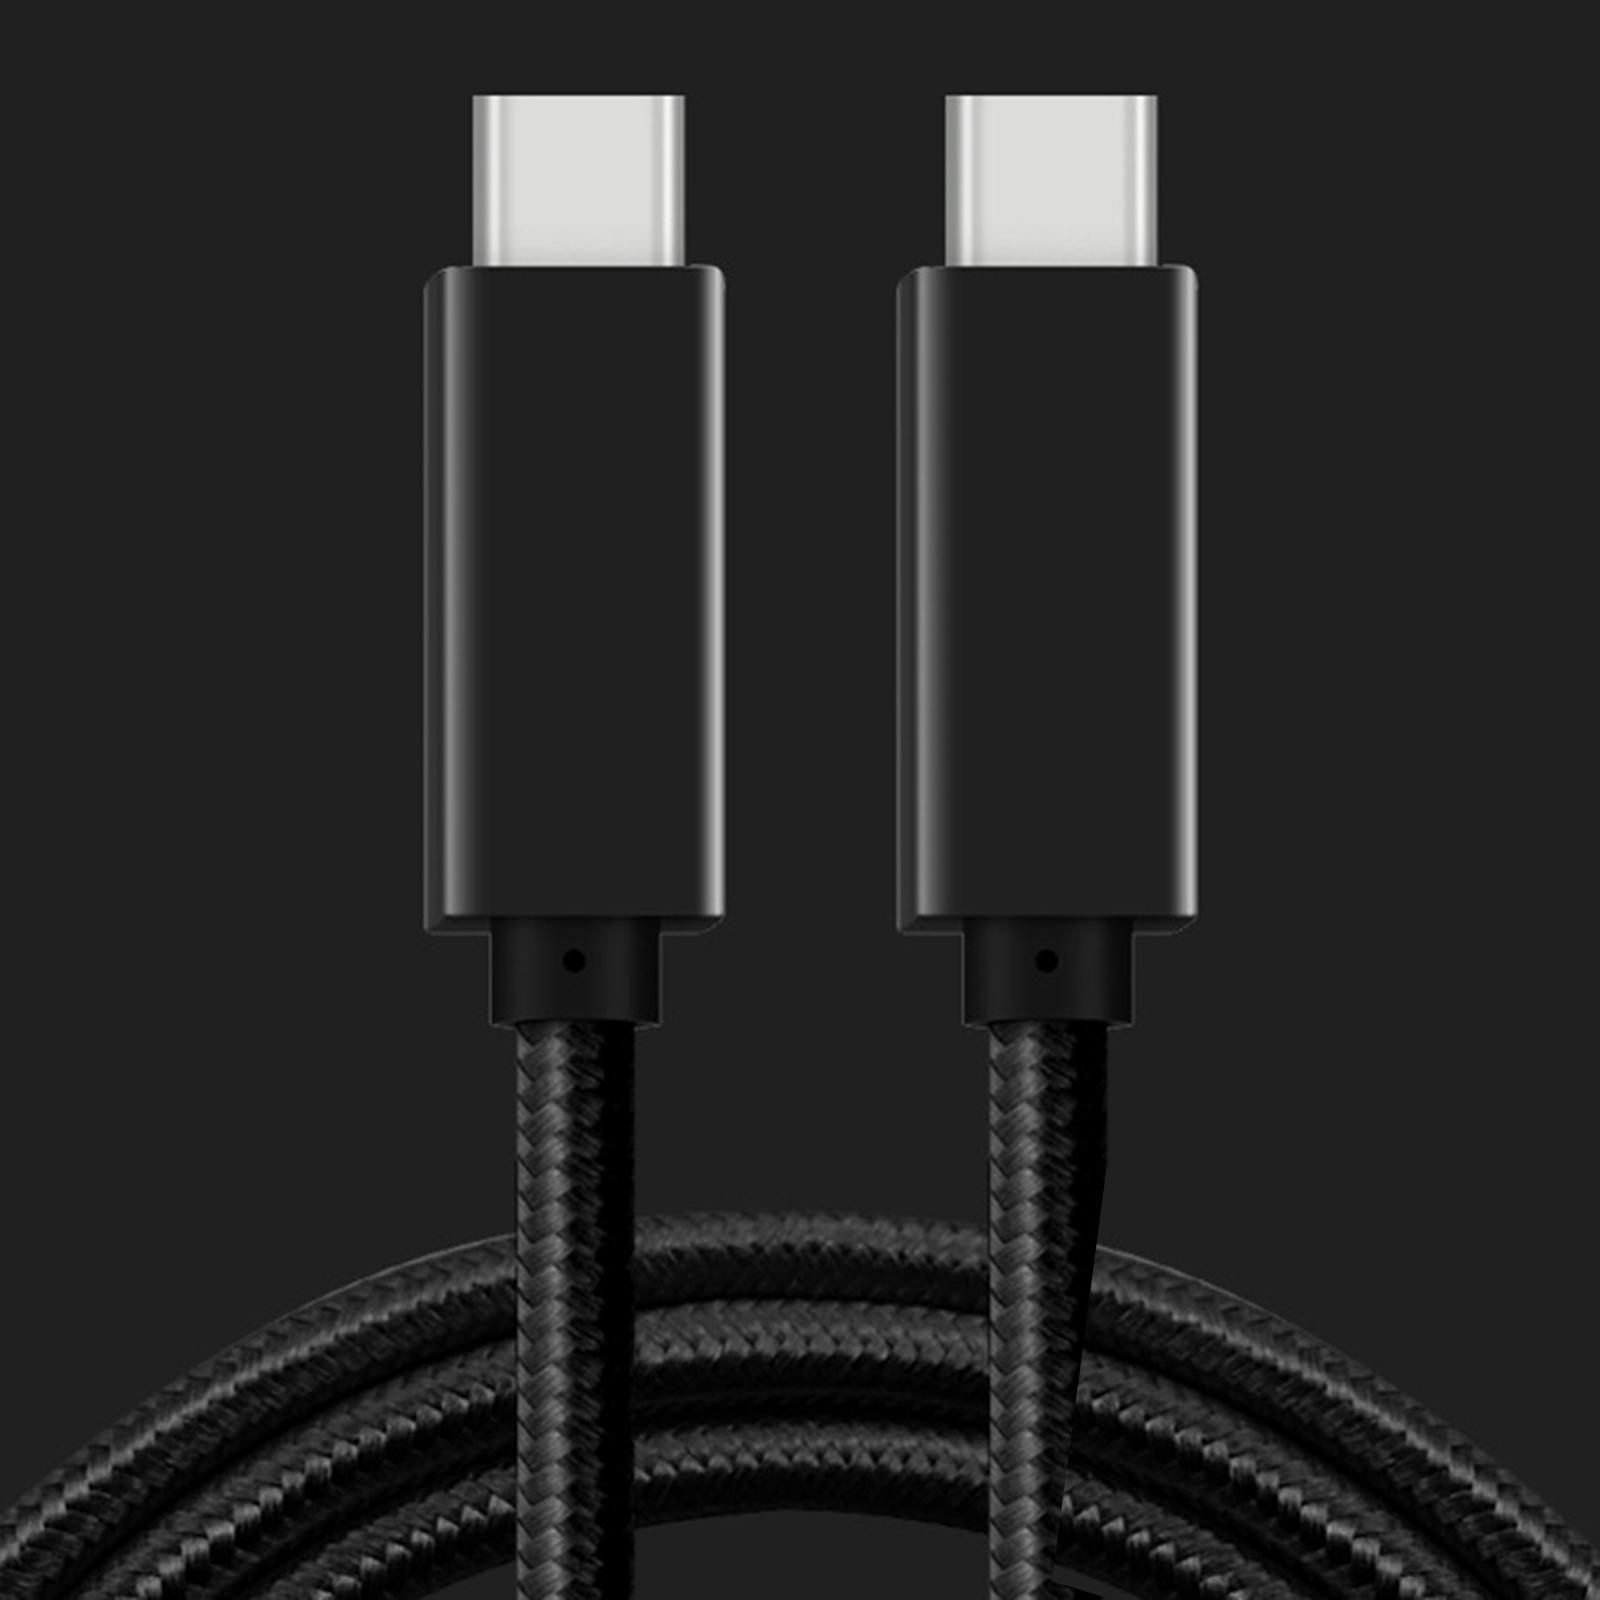 to  USB 3.1  Cable PD